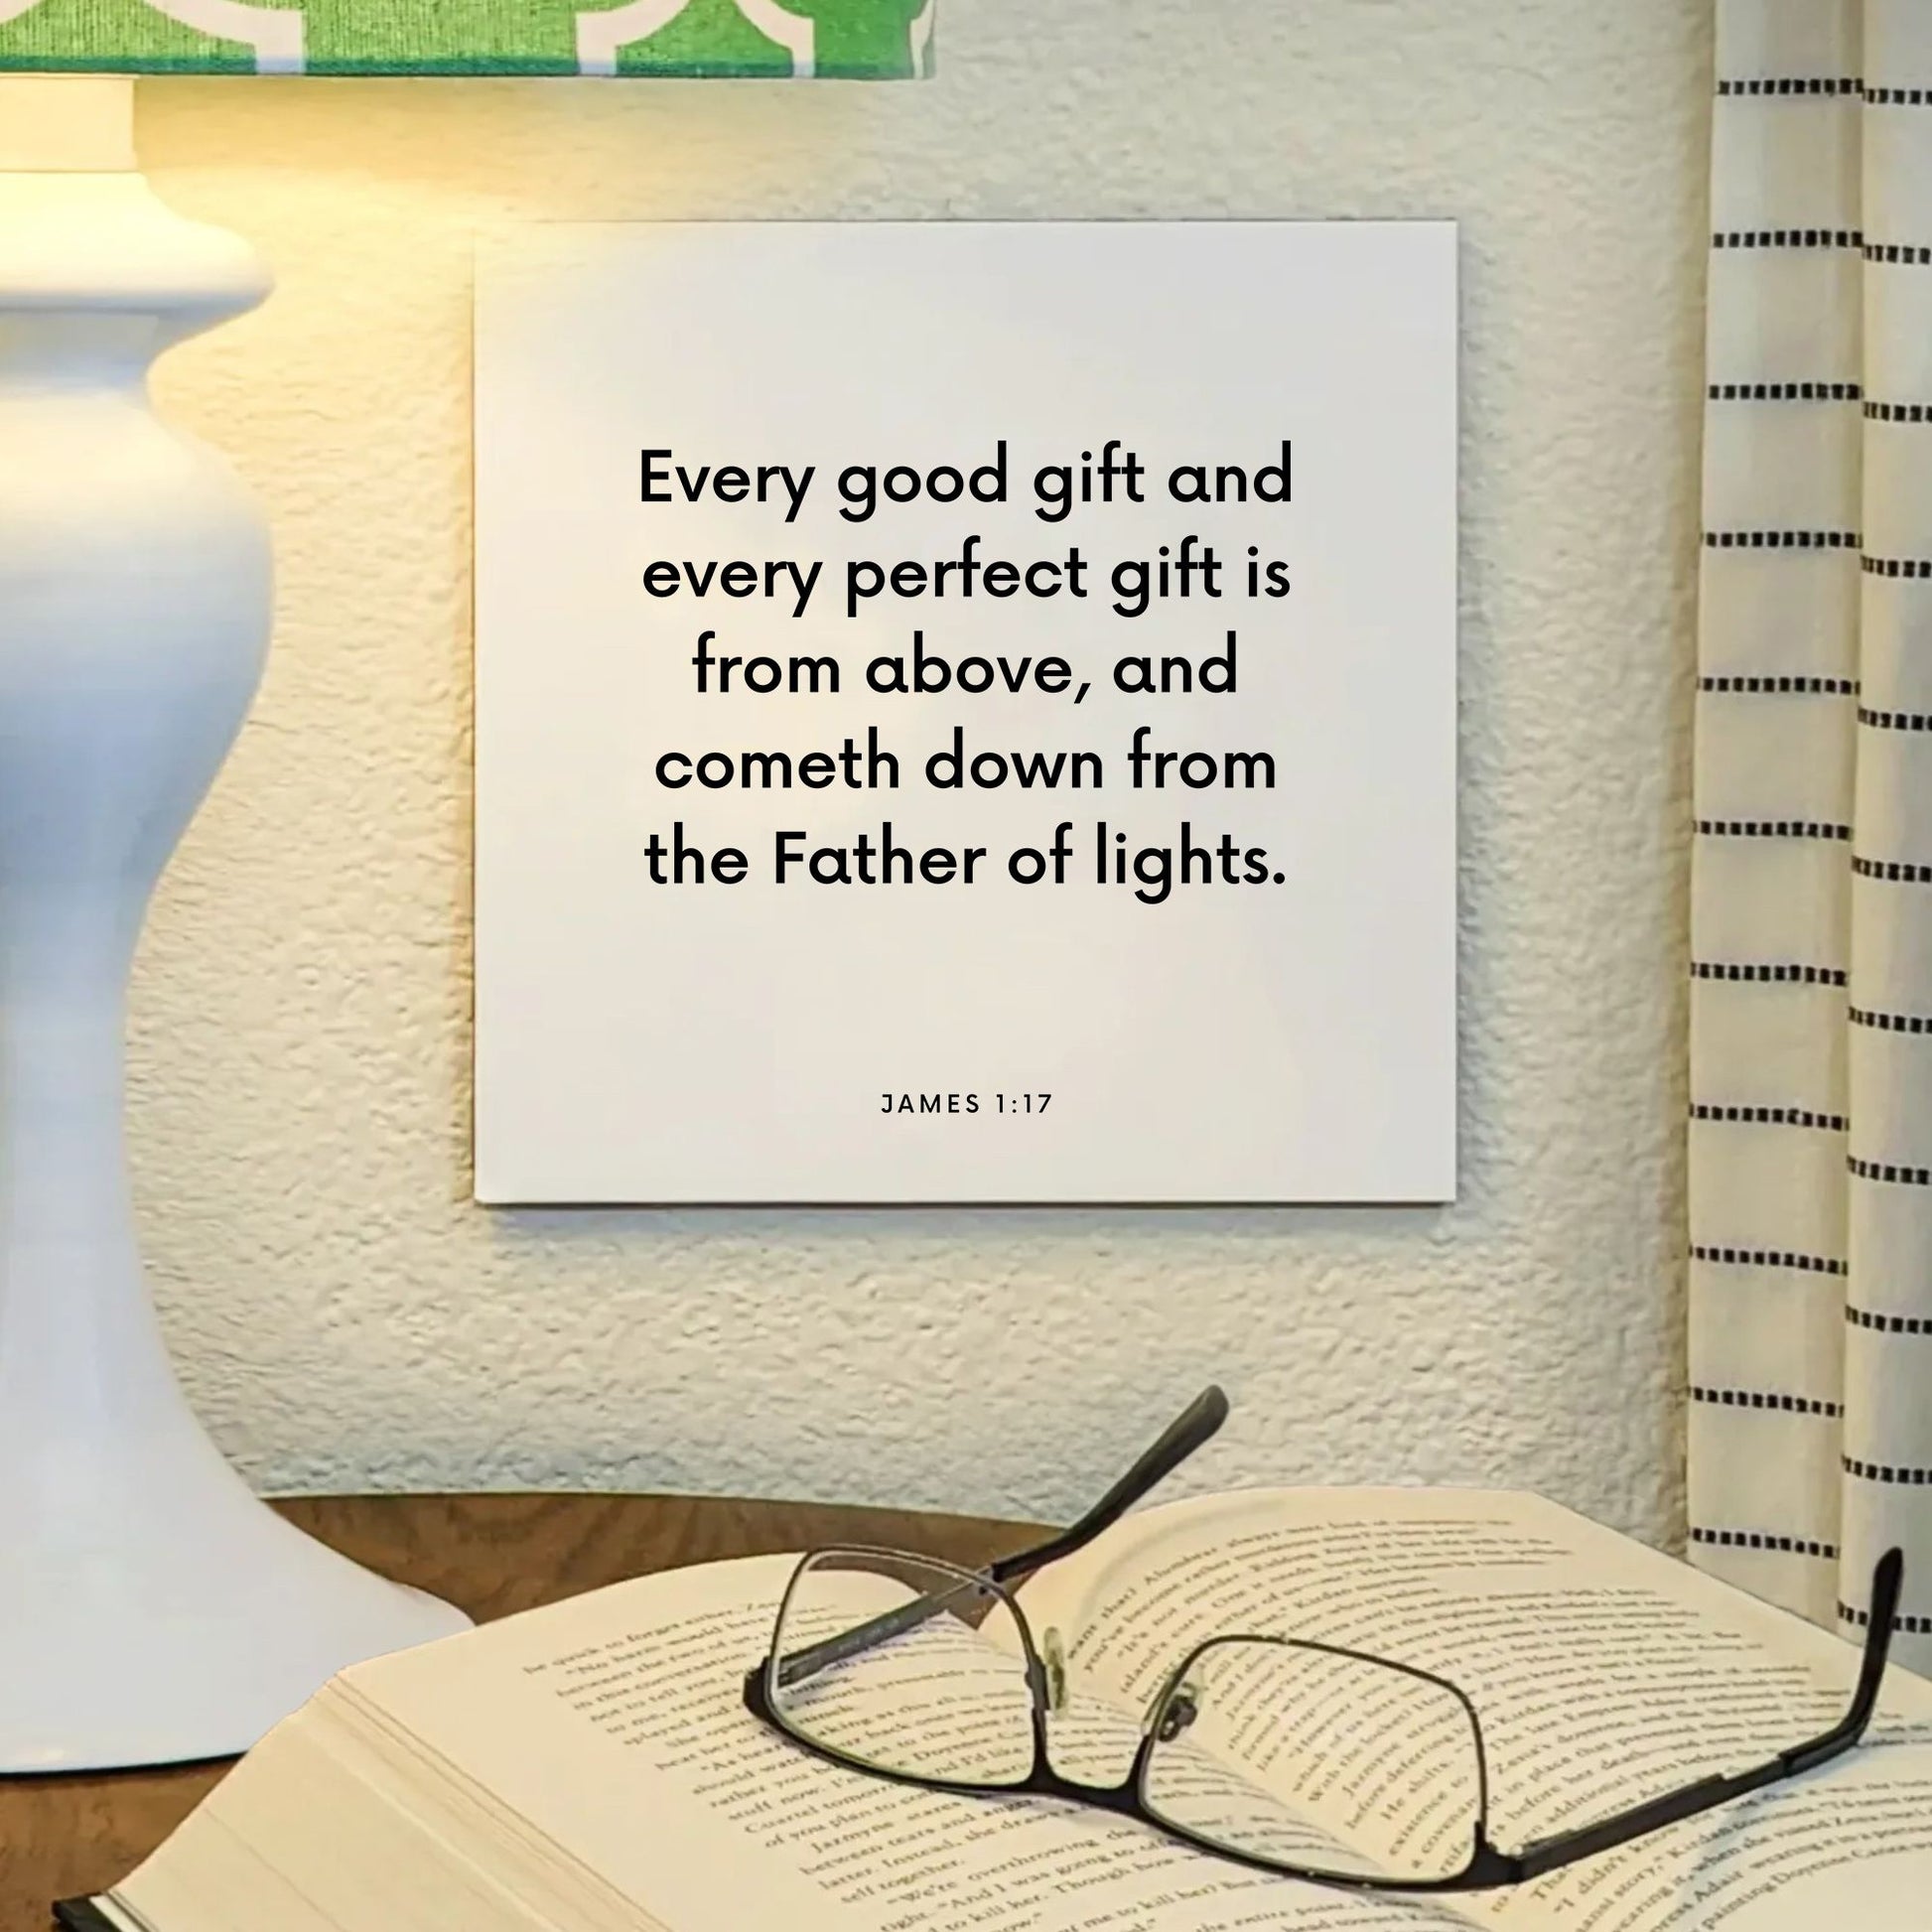 Lamp mouting of the scripture tile for James 1:17 - "Every good gift and every perfect gift is from above"